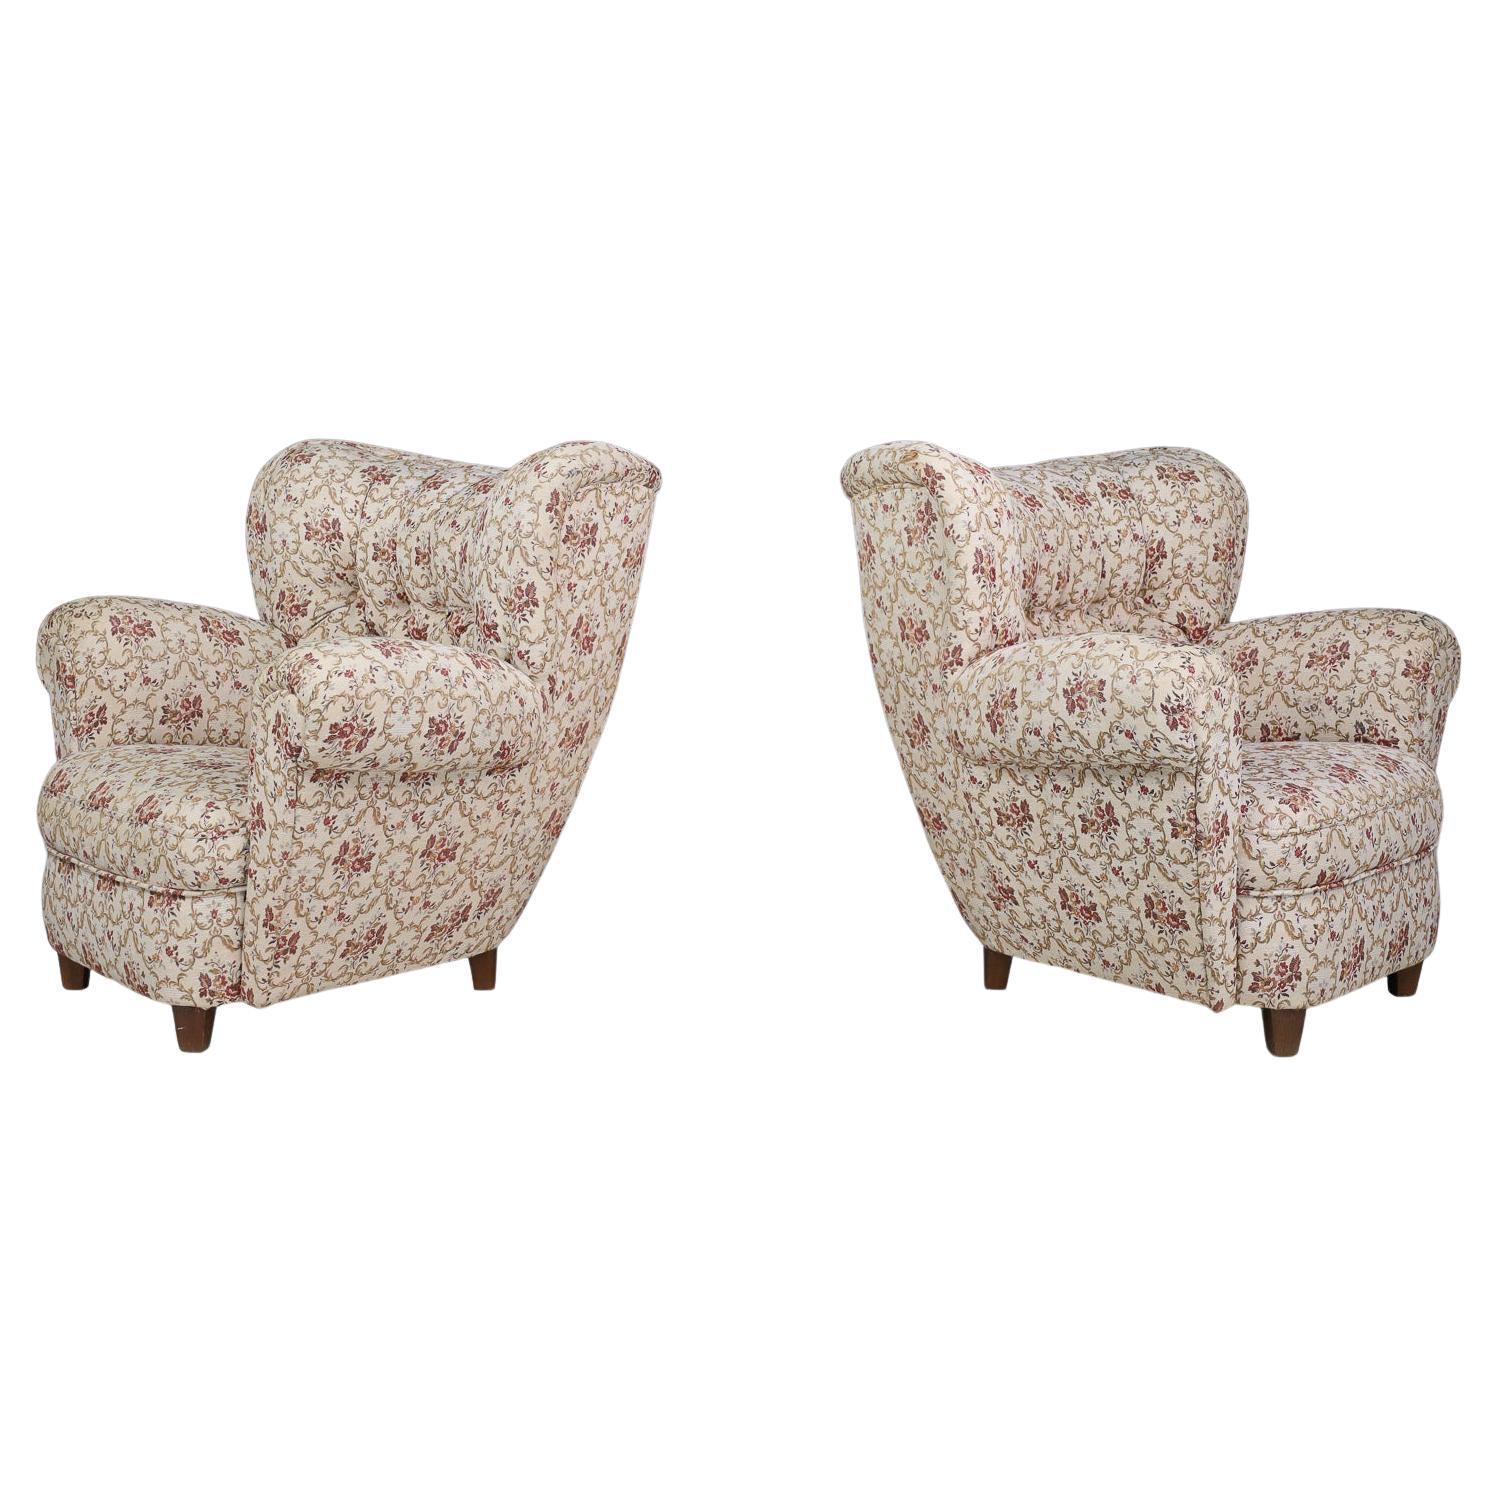 Large Art-Deco Pair Armchairs in Original Floral Upholstery, Praque 1930s For Sale